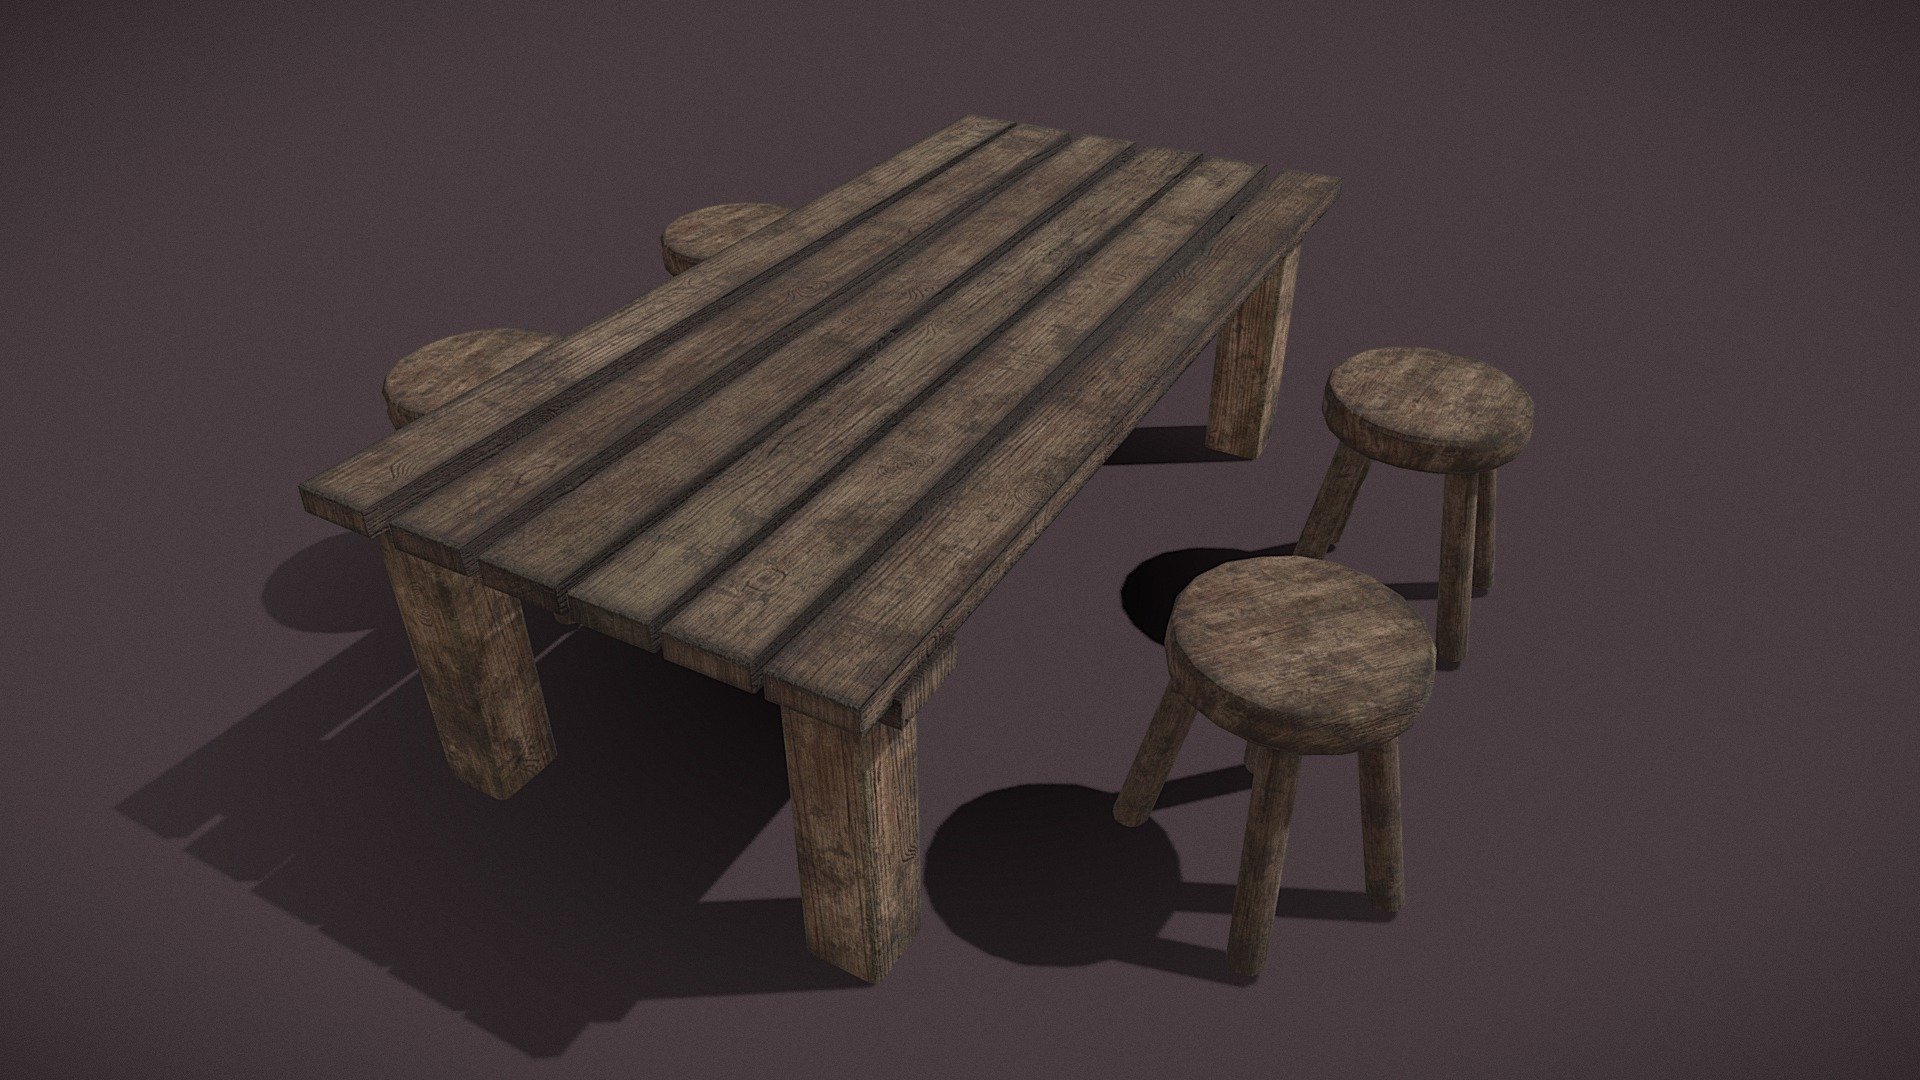 Tavern Table and Stool 3D Model

Includes 1 Table and 1 Stool Model. PBR Textures in 4096 x 4096 Table and Stool are seperate Materials 3d model